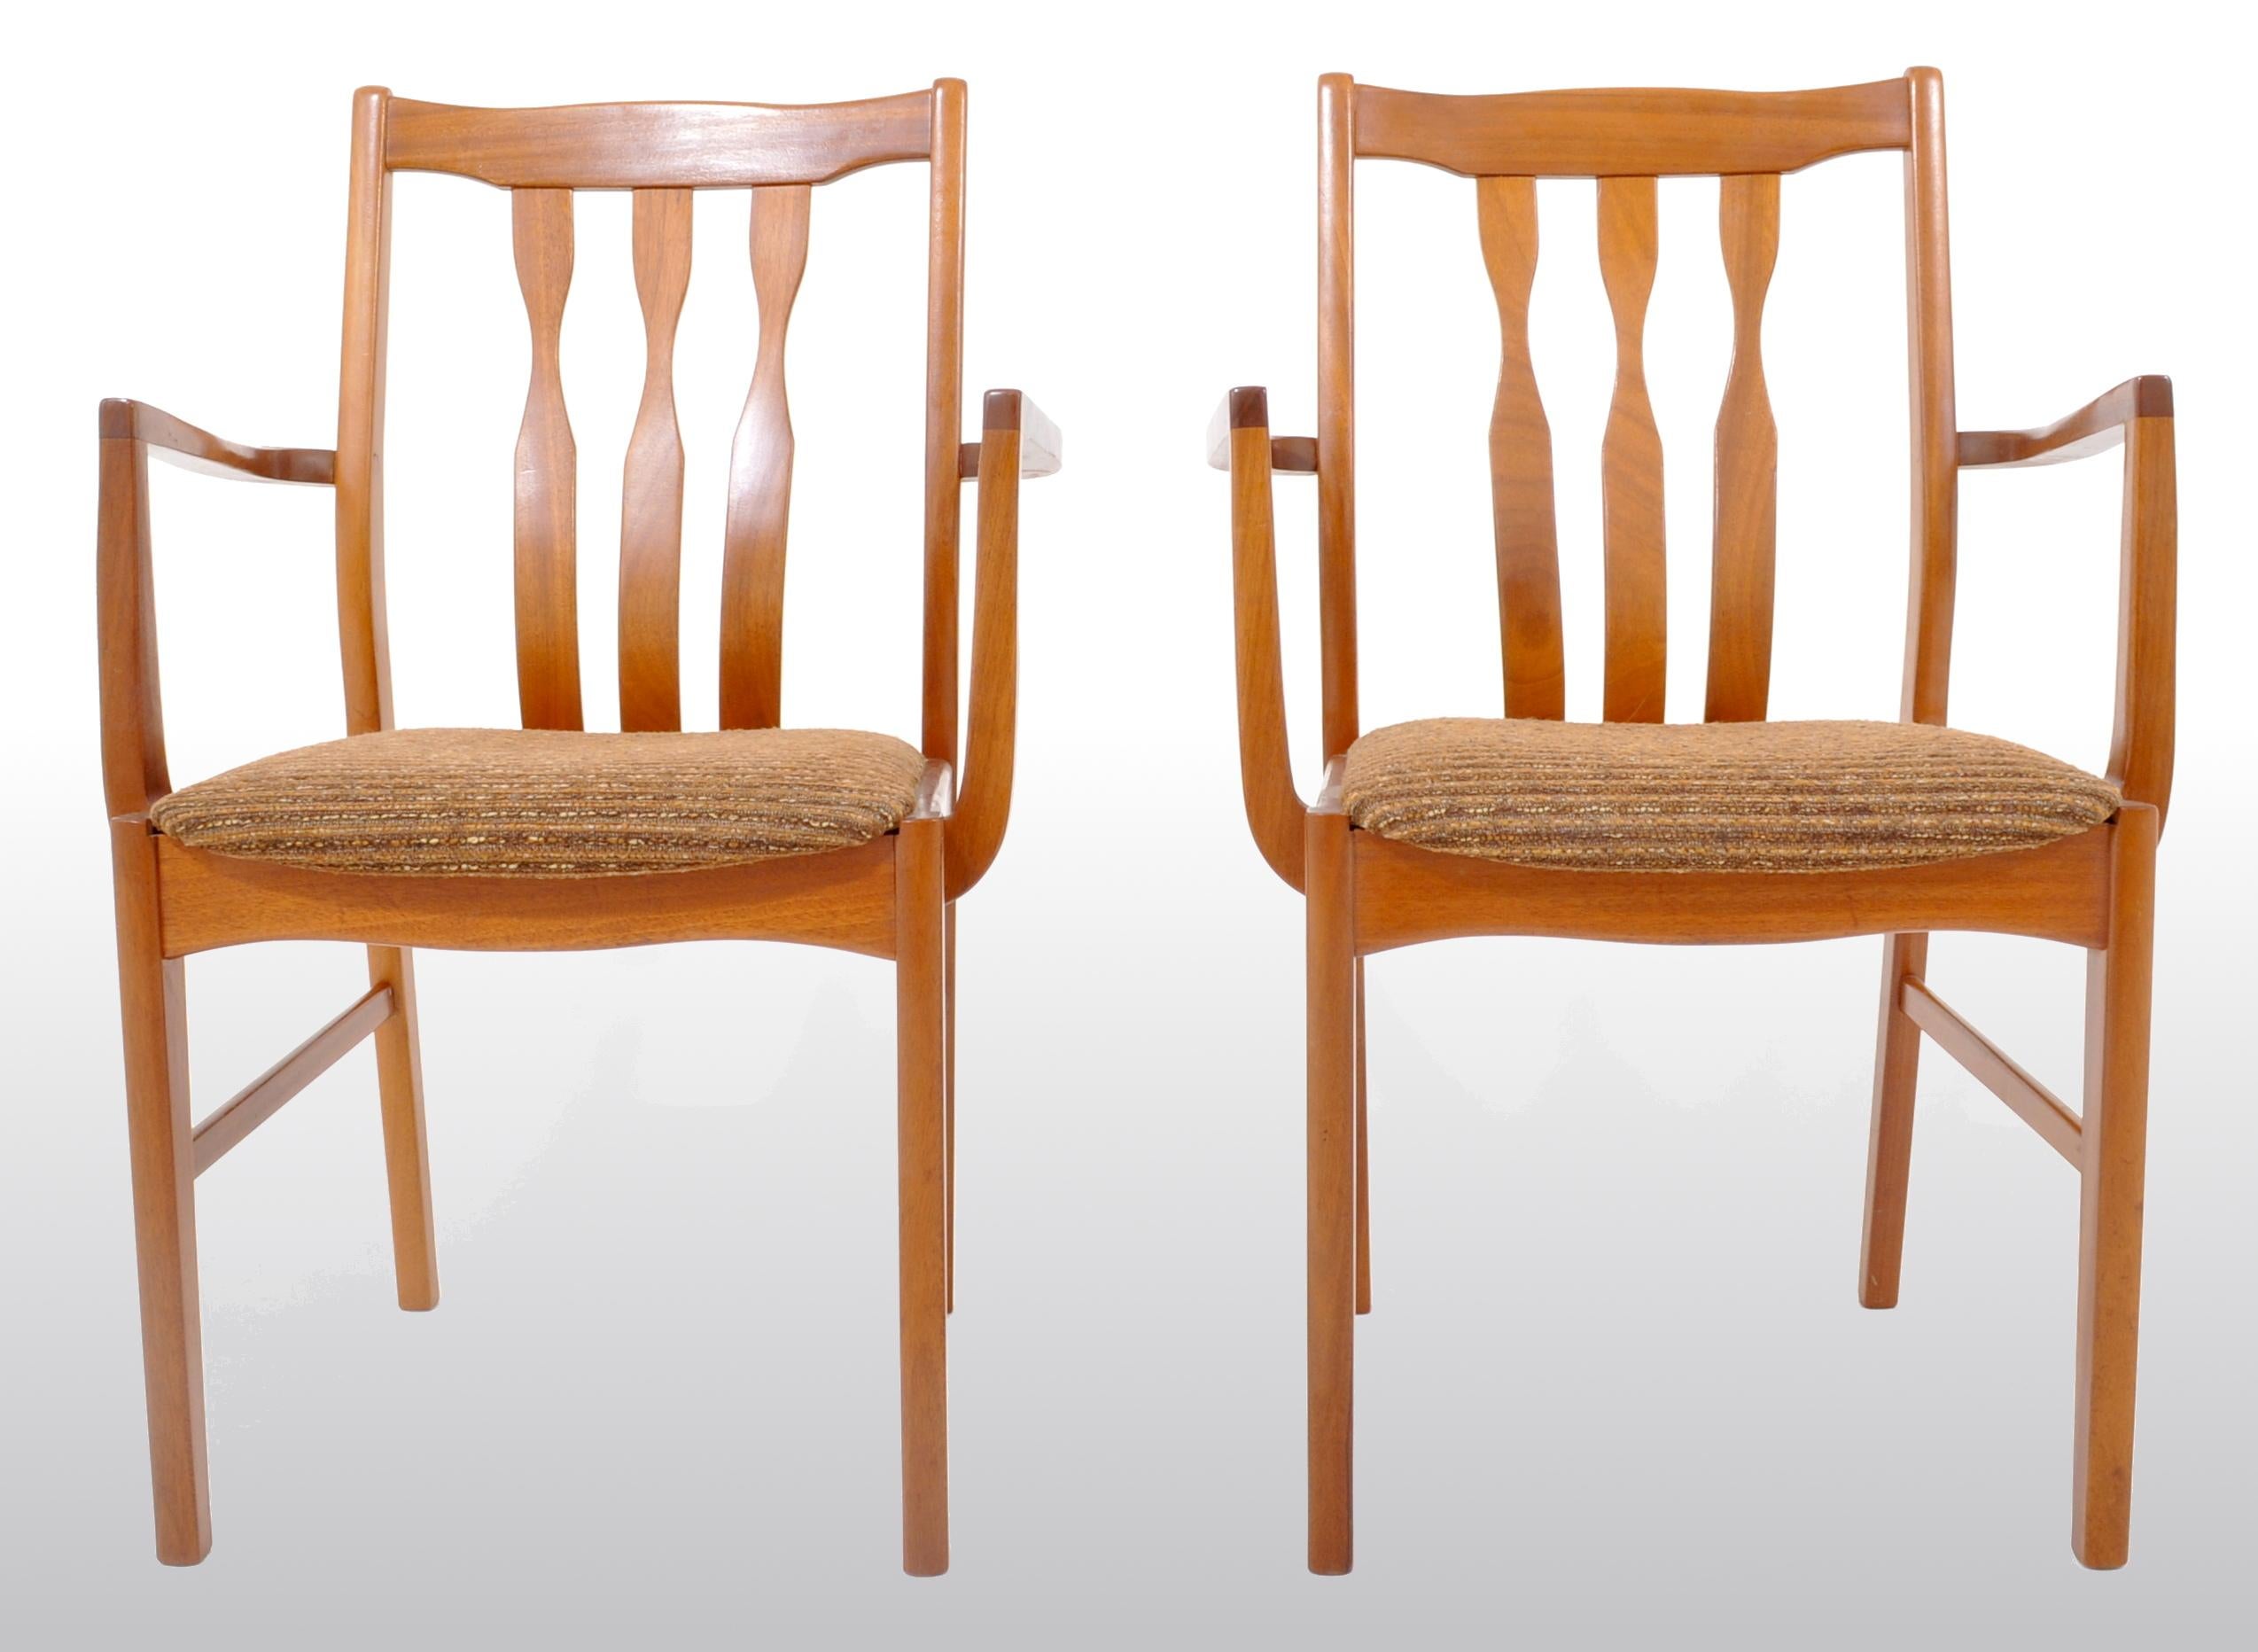 Pair of Mid-Century Modern captain's/armchairs in teak, 1960s. The chairs having three backsplats and shaped arms, having the original textured mohair fabric.